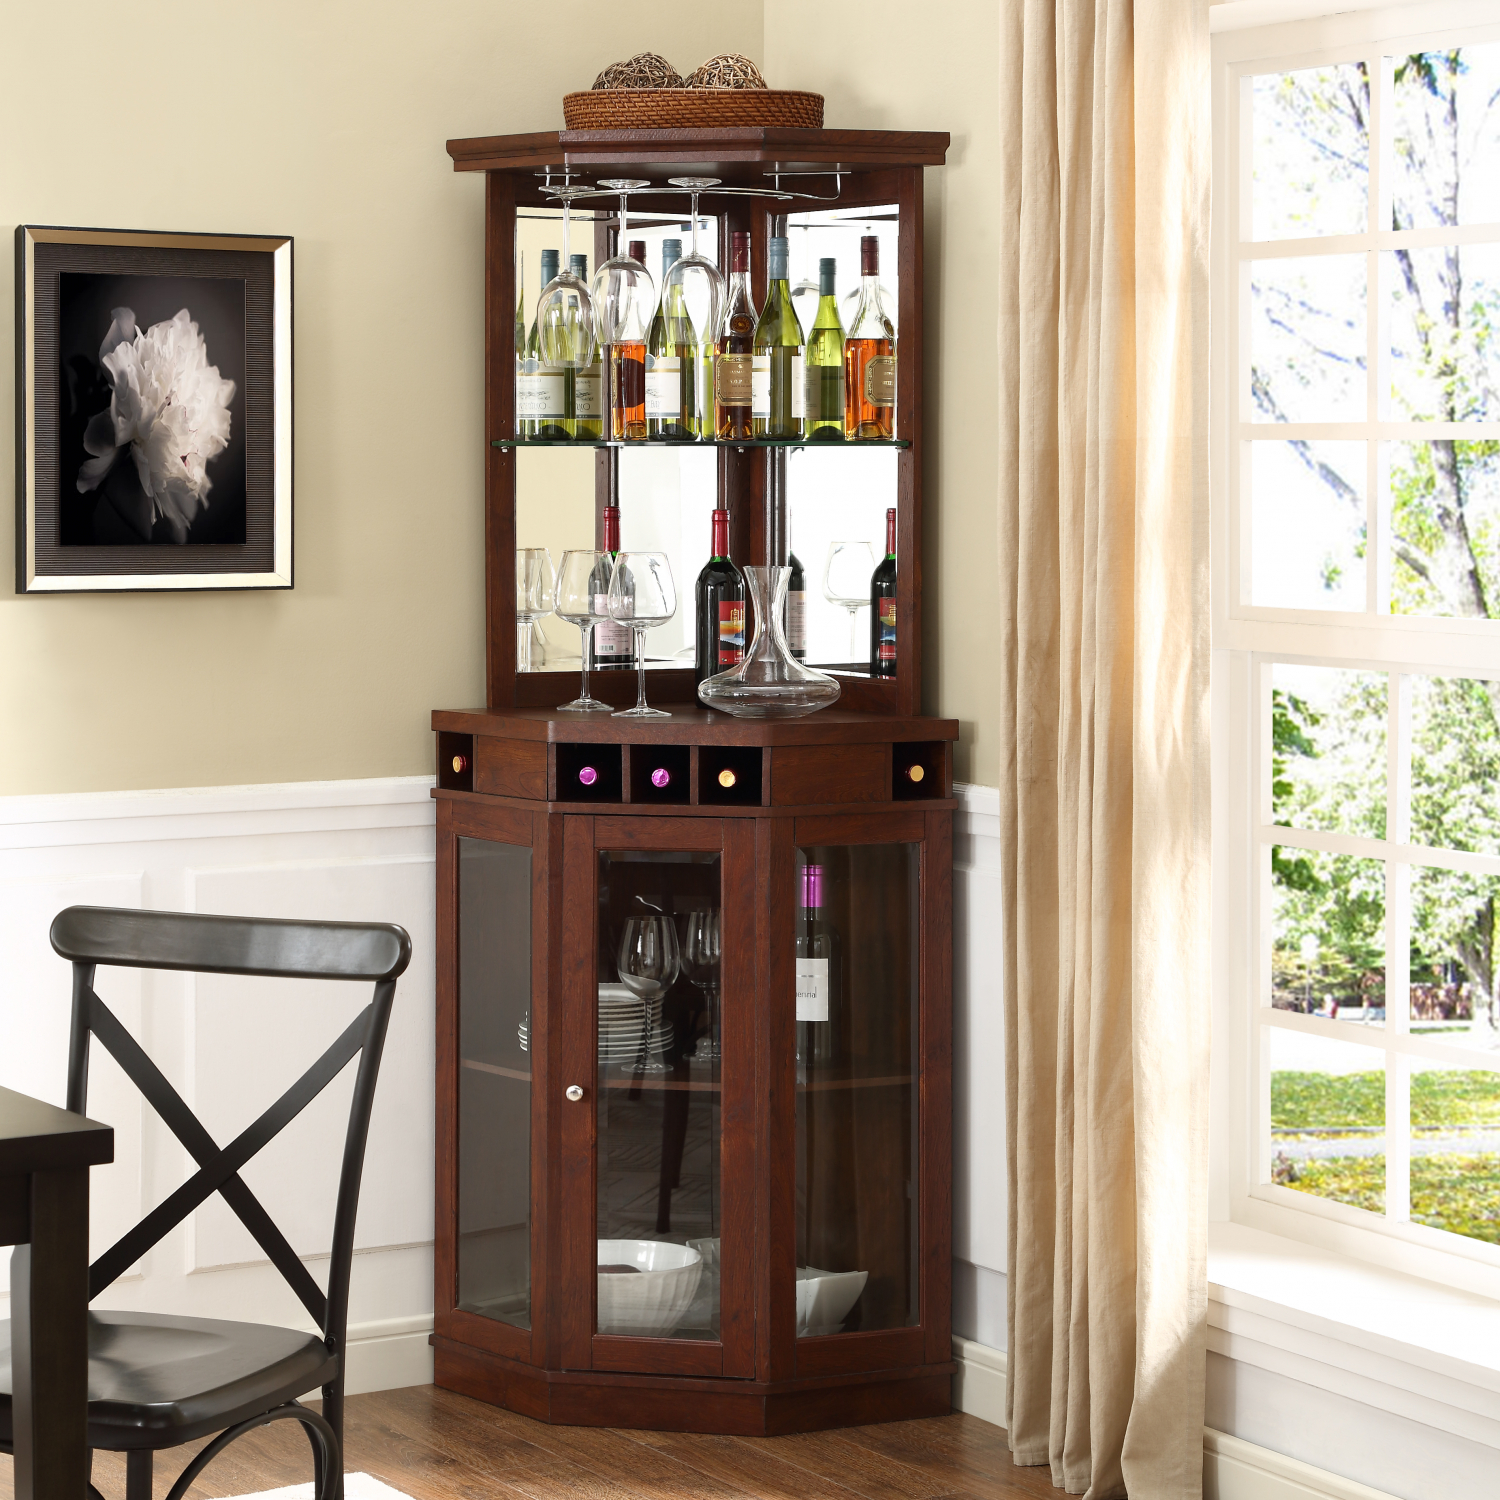 Details About Mini Bars Liquor Cabinet Whiskey Cabinets Wine Storage Wooden Home Bar Furniture in size 1500 X 1500